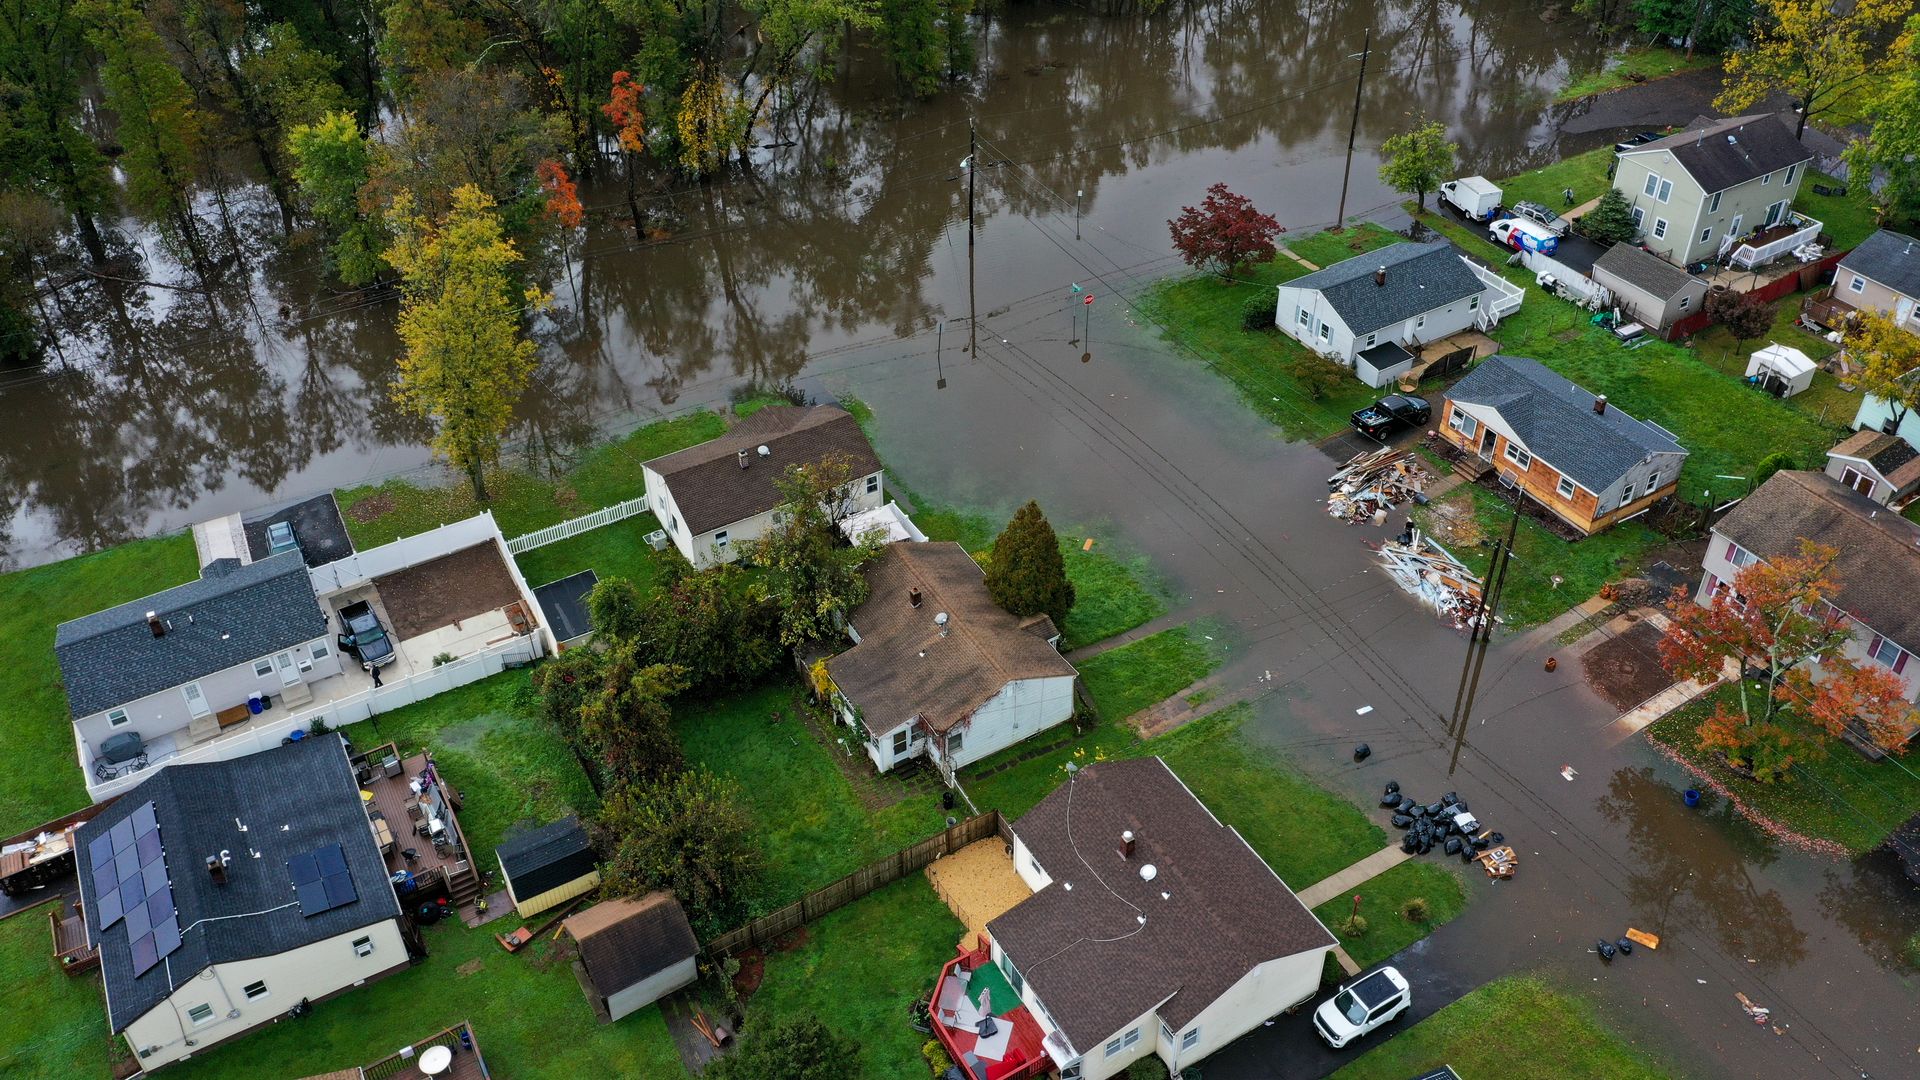 An aerial view of a residential area in Middlesex County as floodwater covers streets that norâeaster left behind flash floods east coast, in New Jersey, United States on October 26